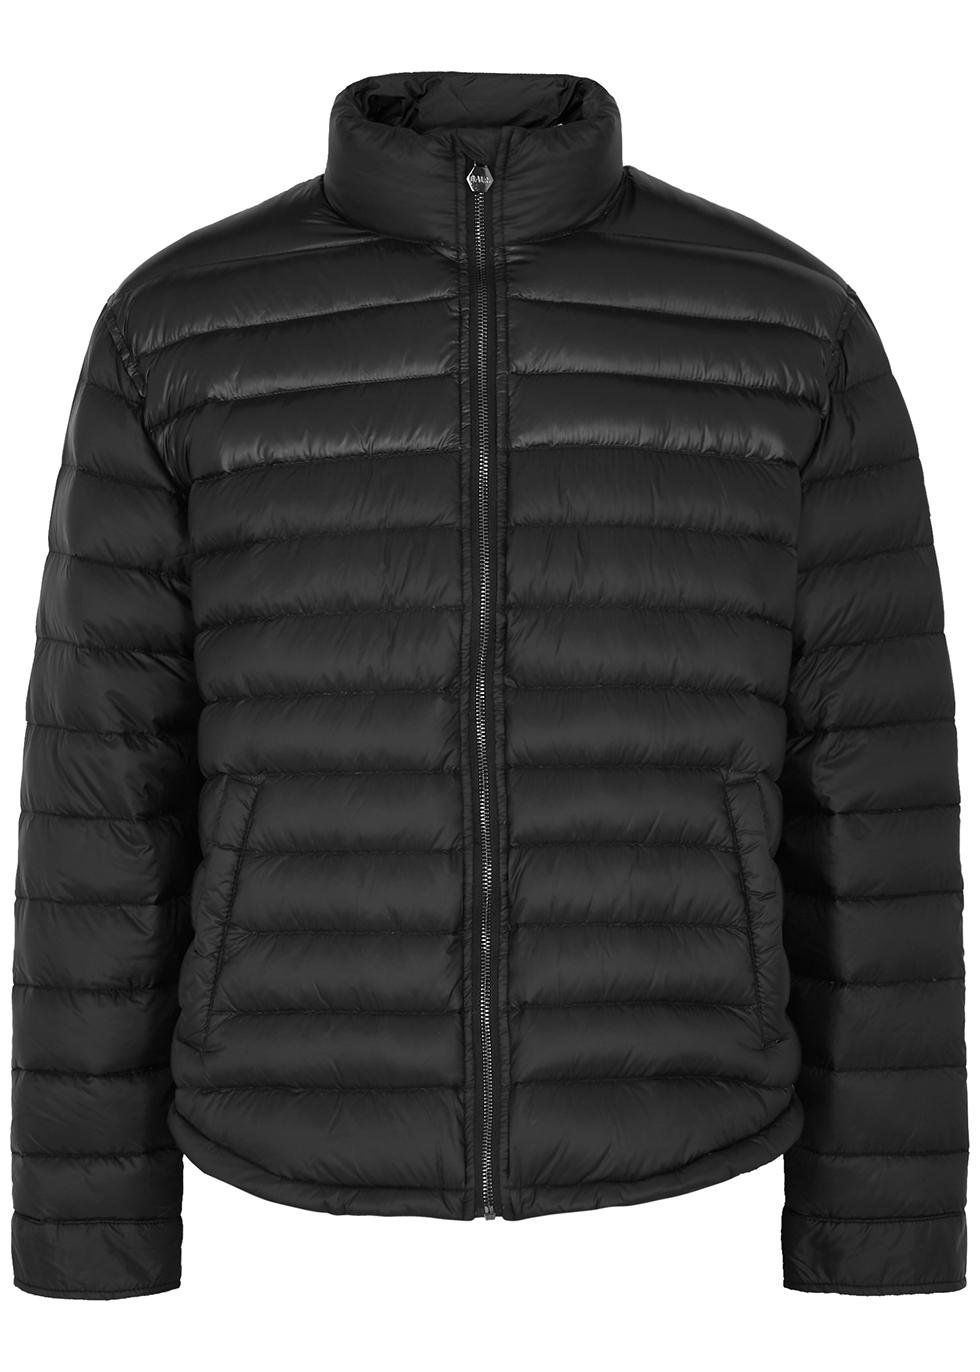 Olaf quilted shell jacket by BALR.